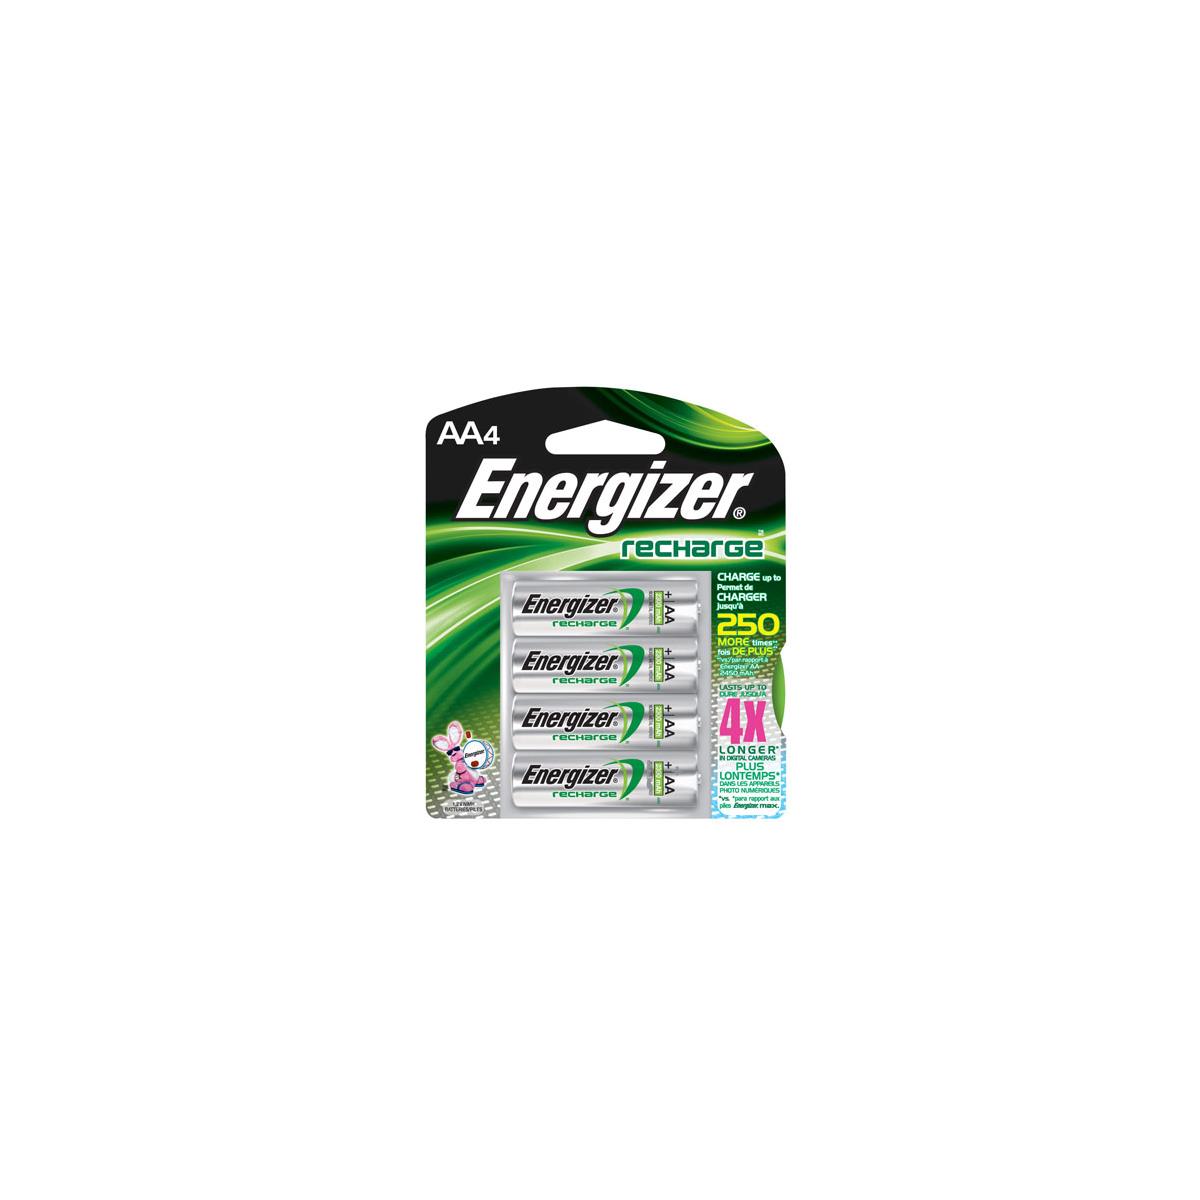 Image of Energizer Rechargeable AA 2300mAh Rechargeable NiMH Battery